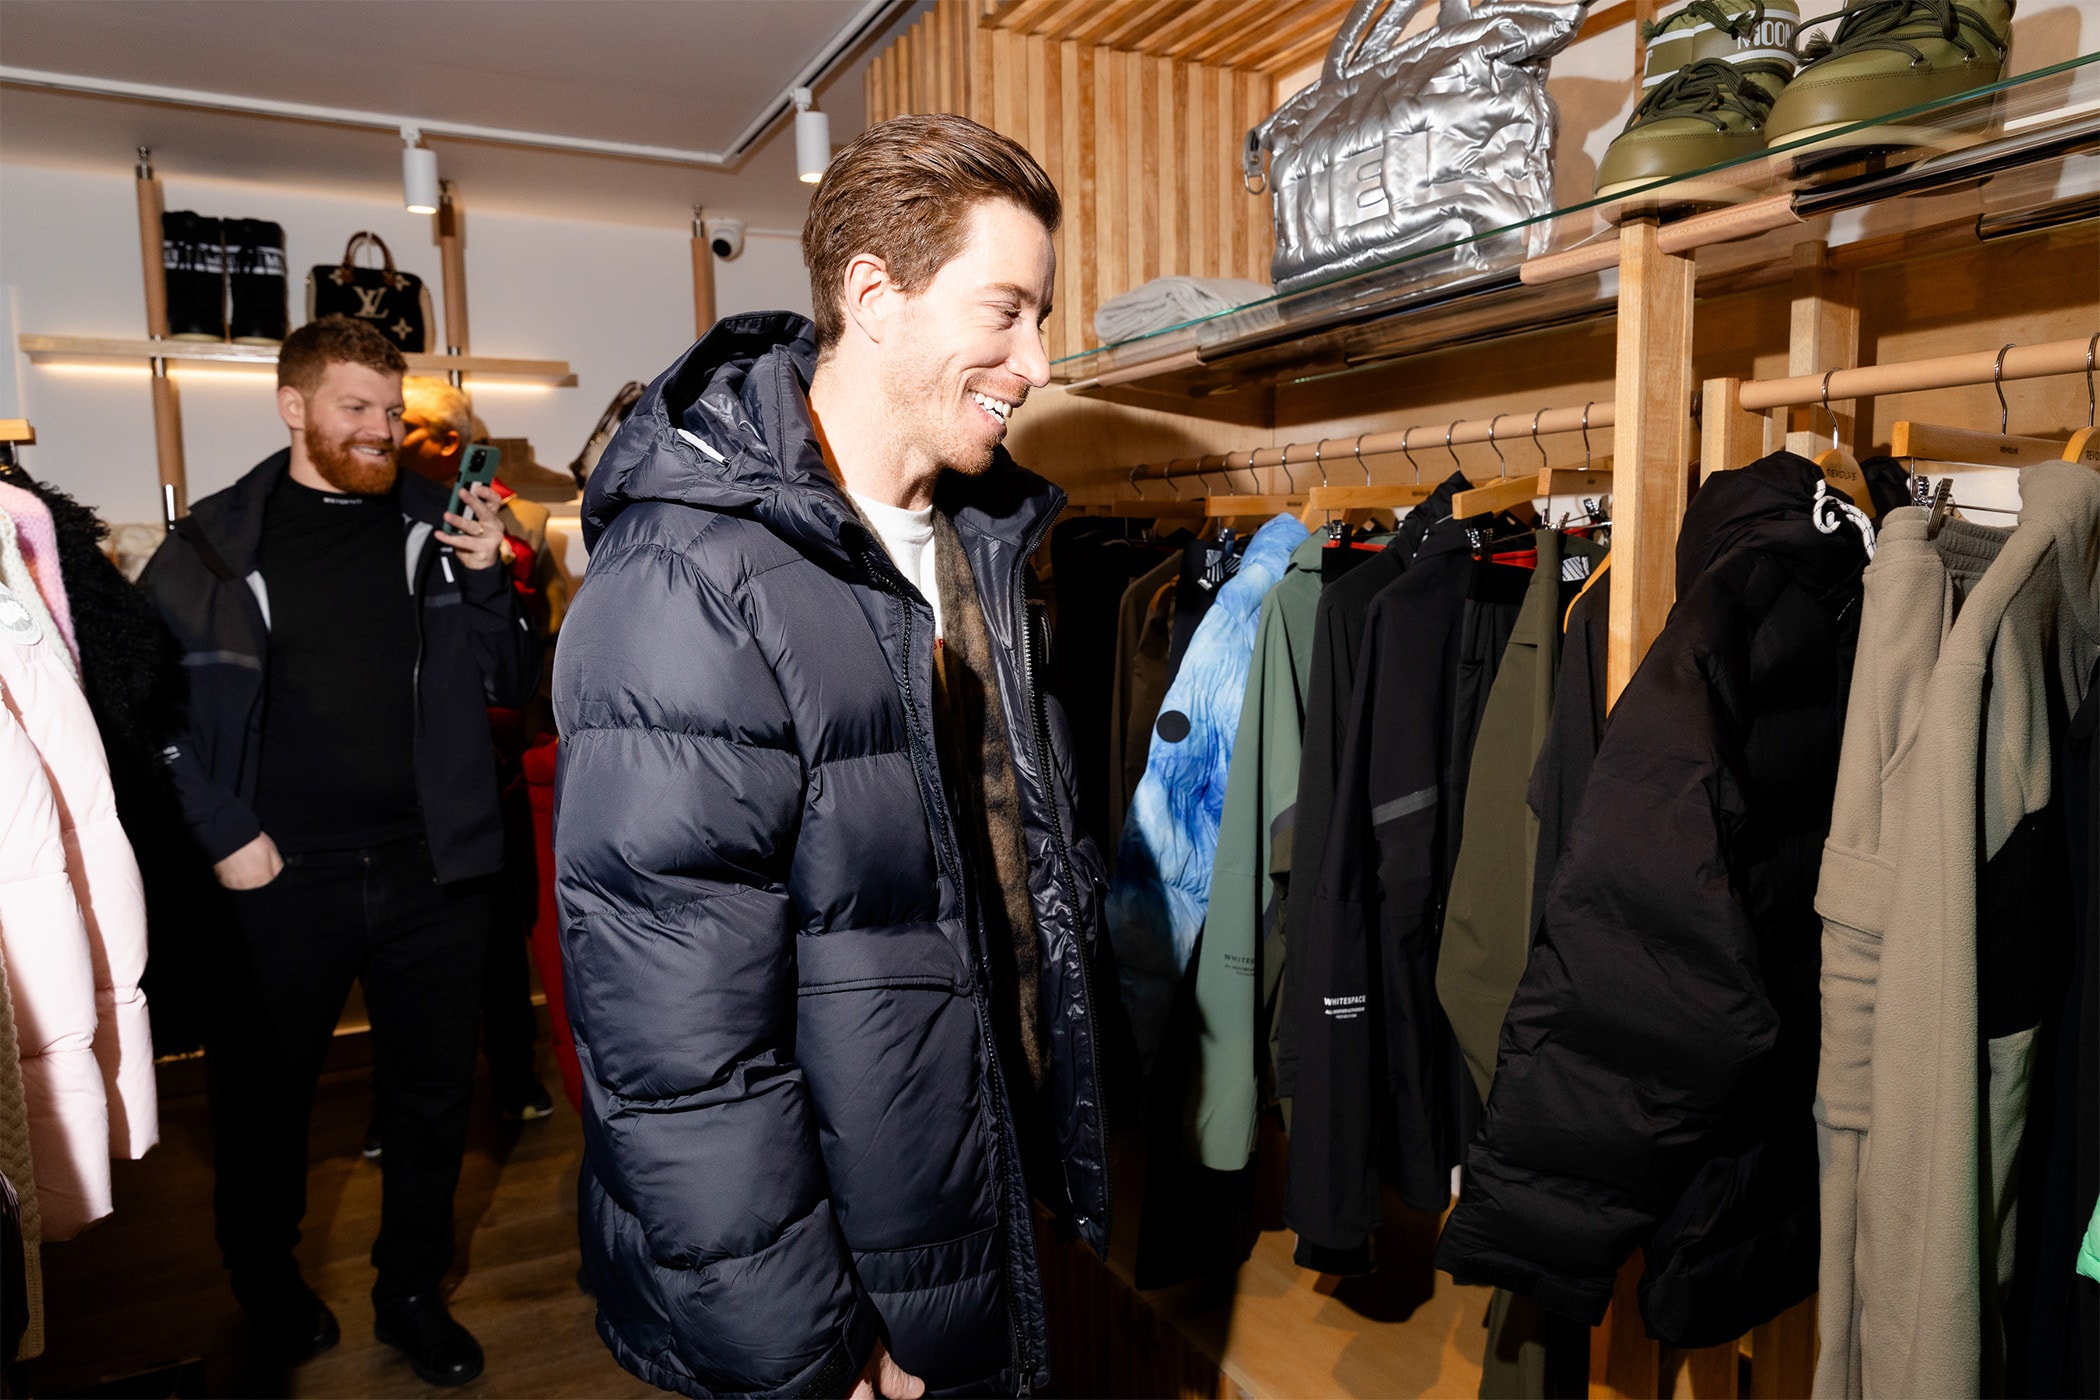 Shaun White is Just Getting Started with WHITESPACE Lifestyle Brand in Revolve/FWRD Pop Up